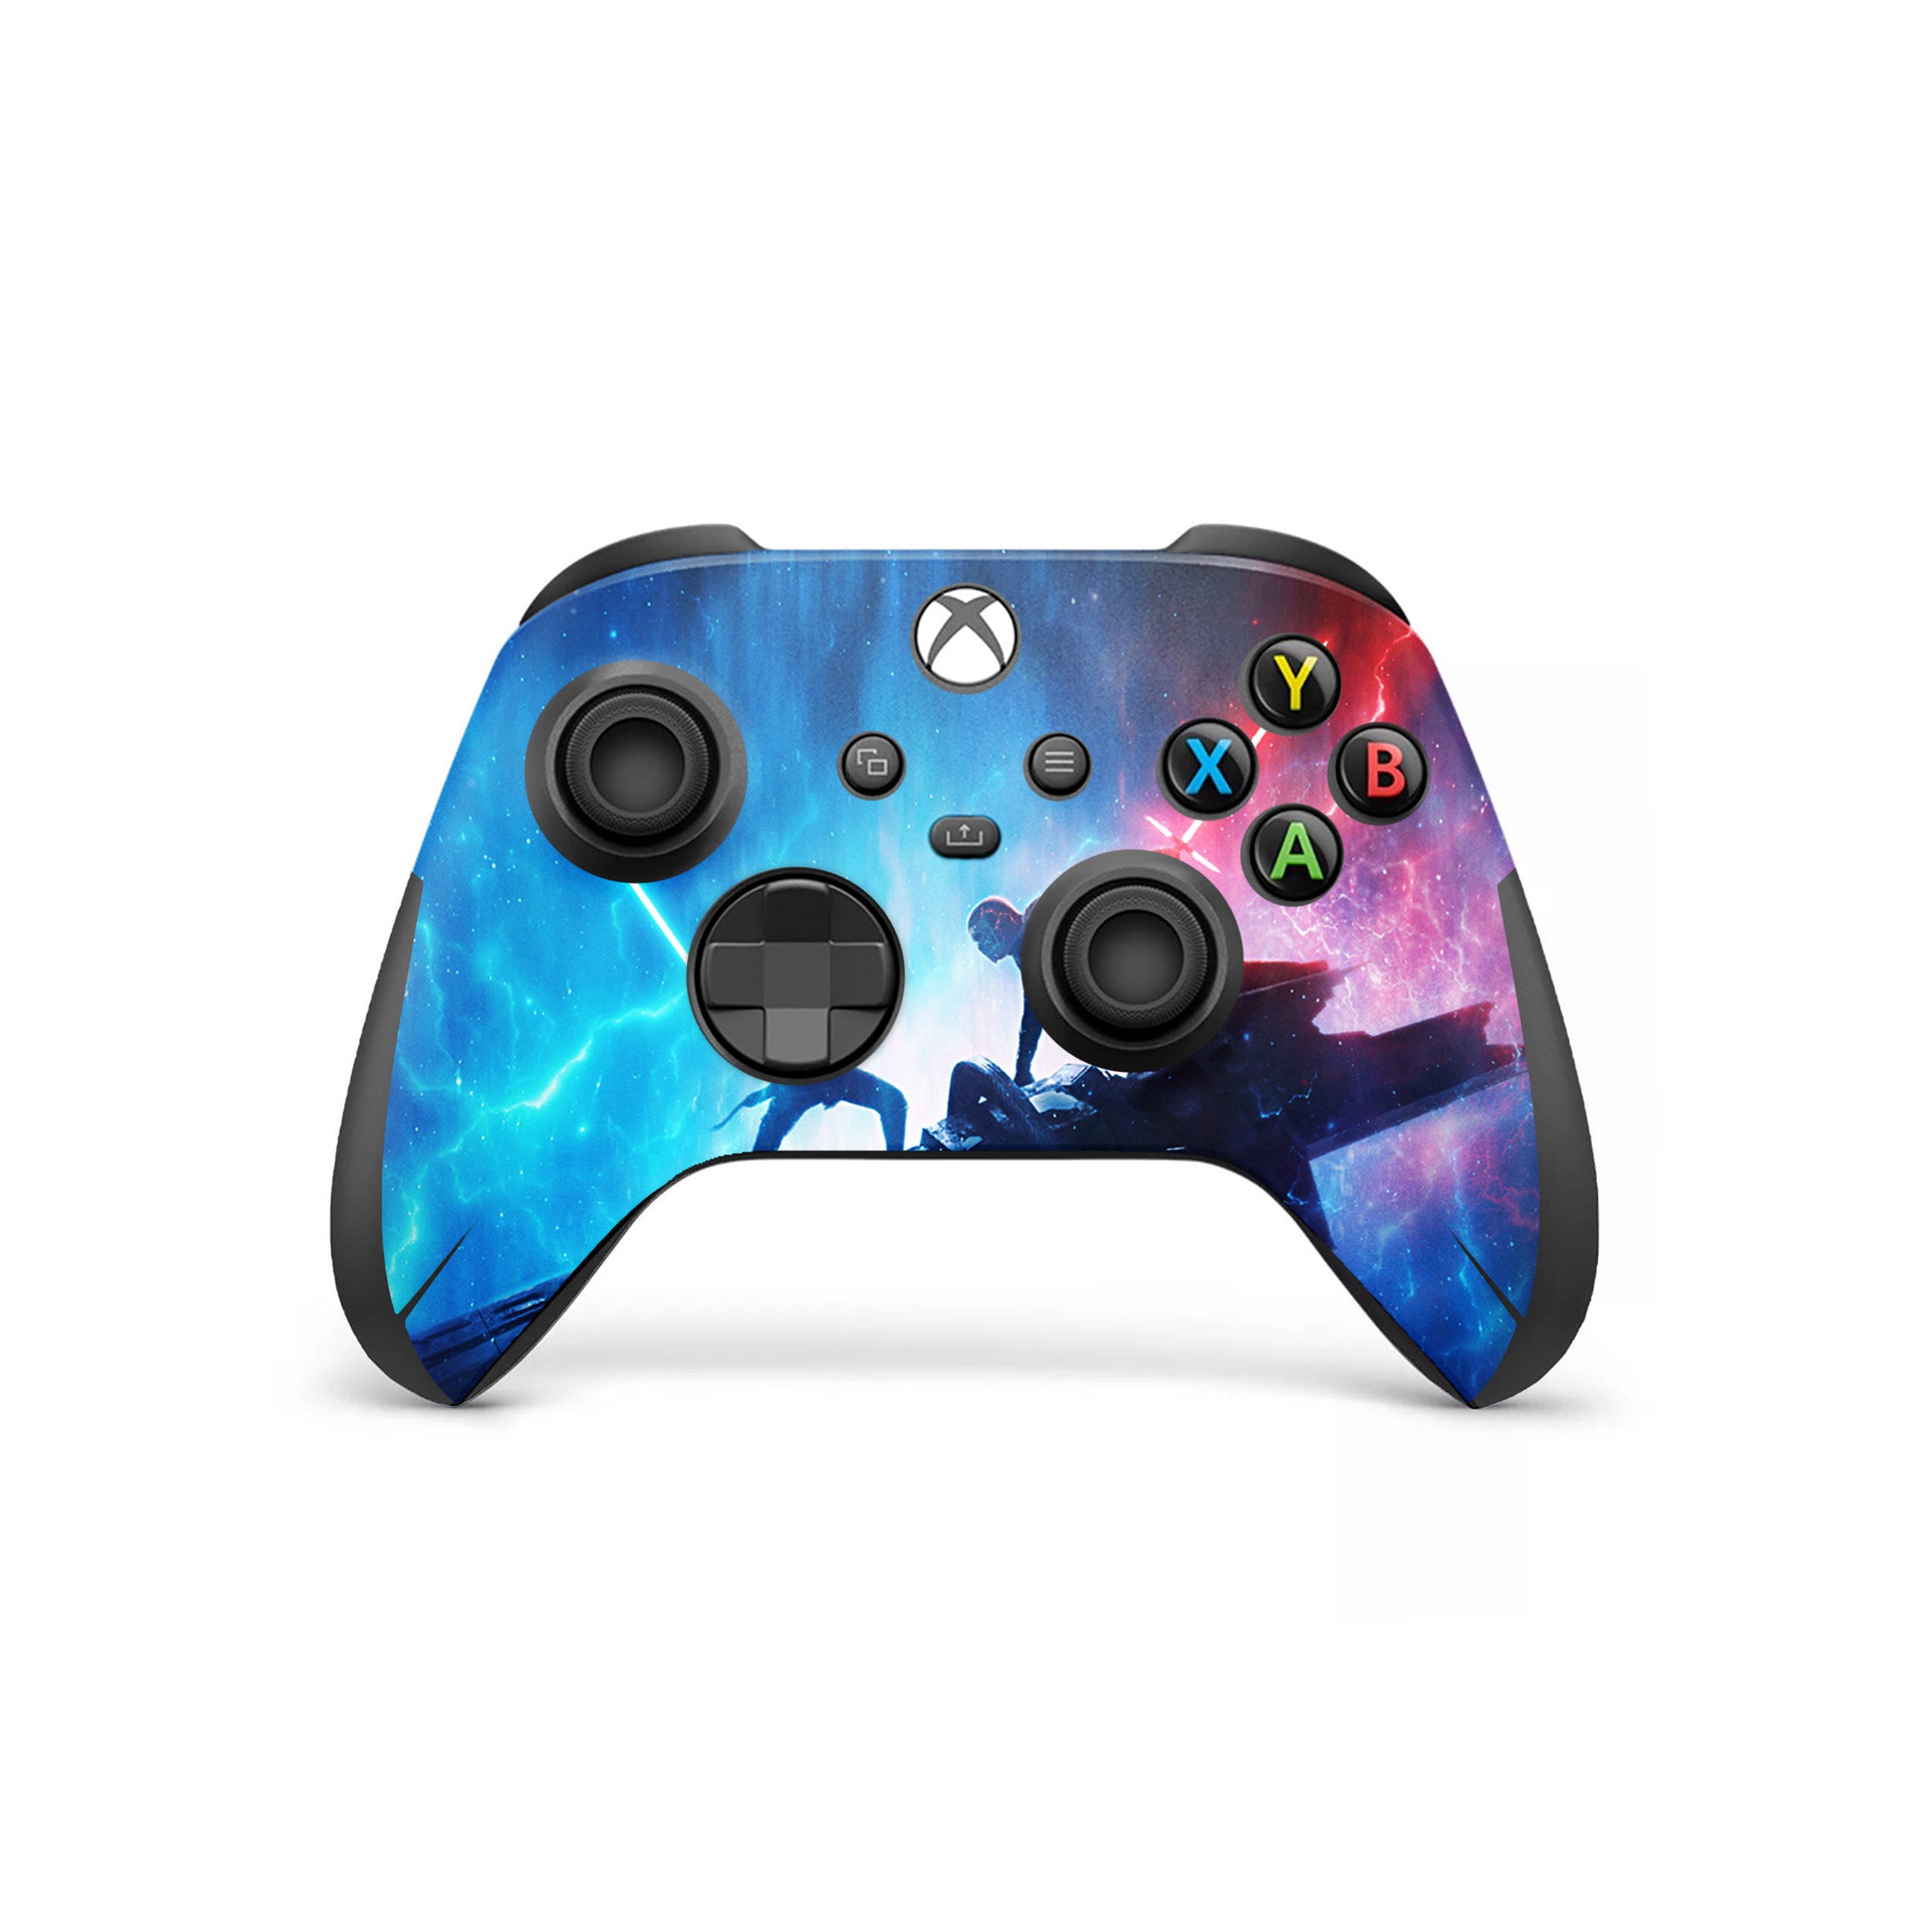 A video game skin featuring a Star Wars The Rise of Skywalker design for the Xbox Wireless Controller.